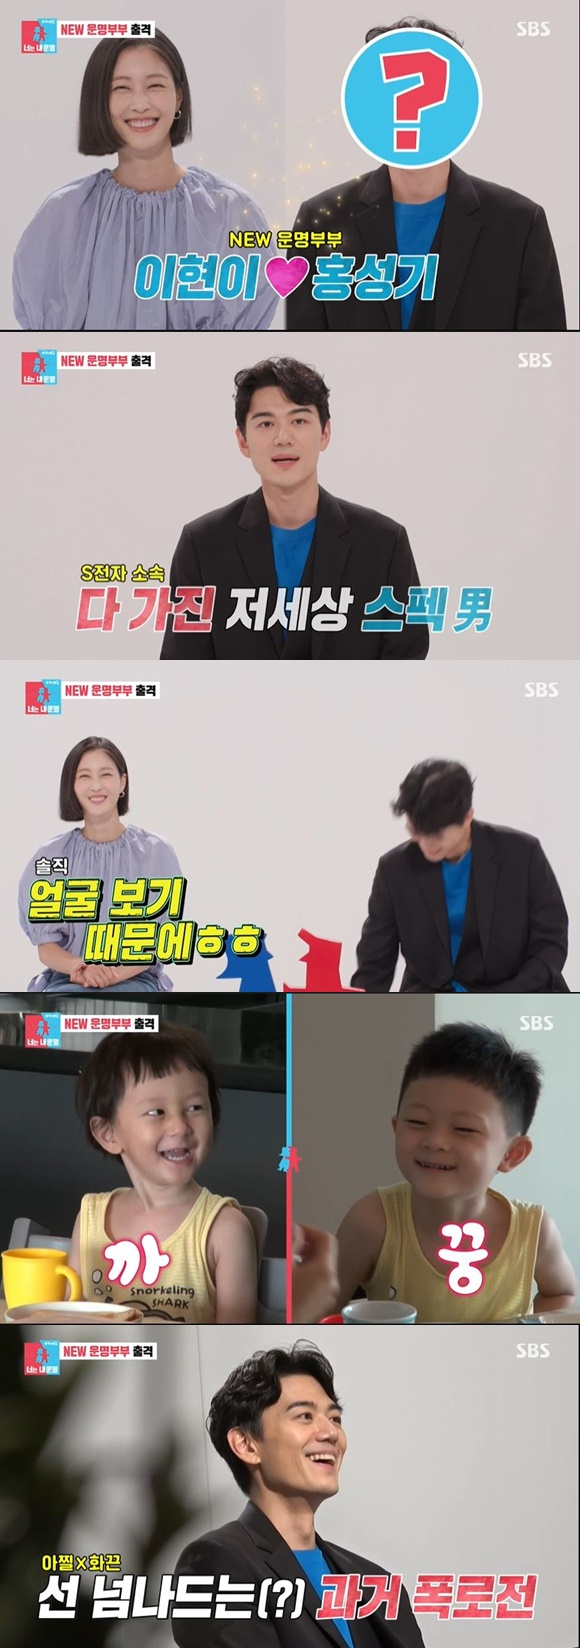 SBS entertainment You are My Destiny - Same Bed, Different Dreams 2: You Are My Dest, which was broadcast on the afternoon of the 23rd, released images of model Lee Hyun-yi and Husband Hong Sung Ki.At the end of the broadcast, Lee Hyun-yi introduced his Husband. Lee Hyun-yi Husband Hong Sung-ki said, We are making it to Samsung Electronics.Im an engineer developing semiconductors, he said, adding that Lee Hyun-yi because I see faces.I saw my face and marriage it, he said, giving Husband a laugh.Moon Jea-wan, who visited the philosophy museum on the day, said, In February, the representative who knew about the real estate said that he would try to worry about (business) together. The mechanic replied, You can get positive about that part.However, the agonist said, I can get the back of my head in the near future.The MCs who watched it at the studio laughed at Lee Ji-hye as a suspect, saying, Mr. Wisdom.Moon Jea-wan then looked at his wife Lee Ji-hye and his own The Princess and the Matchmaker.As for Lee Ji-hye, the introvert said: This is a very different inclination from Moon Jea-wan, and she is very busy in the station.I can not do it at home, even if I am over 70 years old, and there are too many words, he said, pinching Lee Ji-hyes characteristics exactly.The introvert said: But the Moon Jea-wan has a very open ear, so it fits well because its very embracing.My wife met Husband well, he said.Moon Jea-wan asked, My wife is a little angry, when will she be gone? And the introvert said, Its not going away. I go forever. This is instinct.But I do not want to part with you, so live well. There is bad news in December and January in November.Be careful, Moon Jea-wan warned me when he returned home, he took out a set of six sets of gas masks, ramen, fire extinguishers, etc. and installed a bunker in the house.